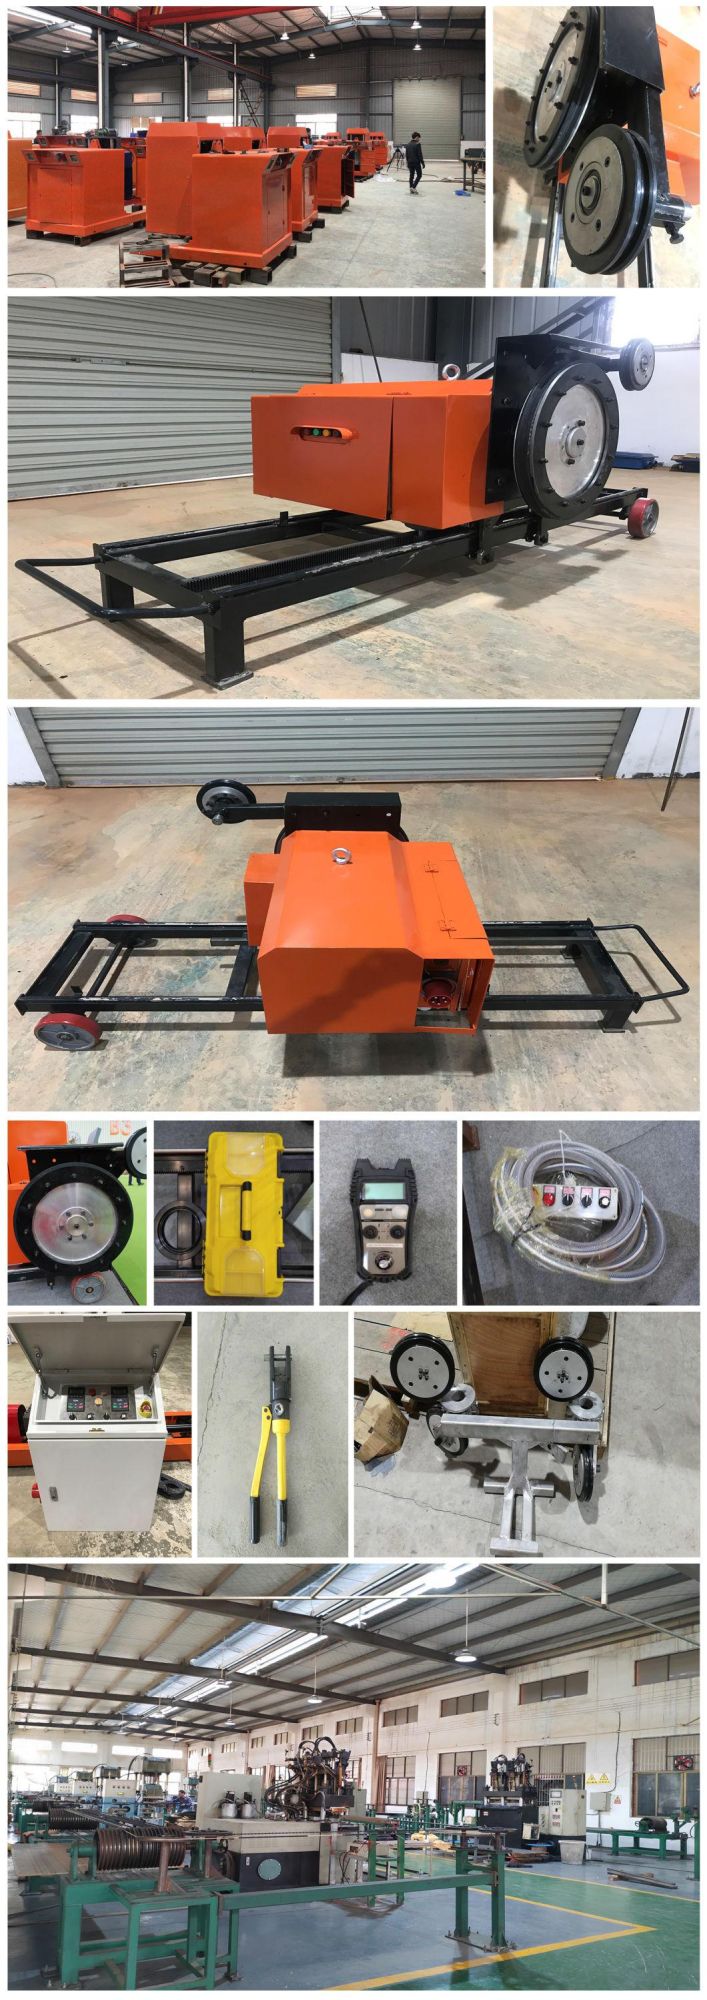 High Cutting Speed Wire Saw Cutter for Reinforced Concrete Demolition